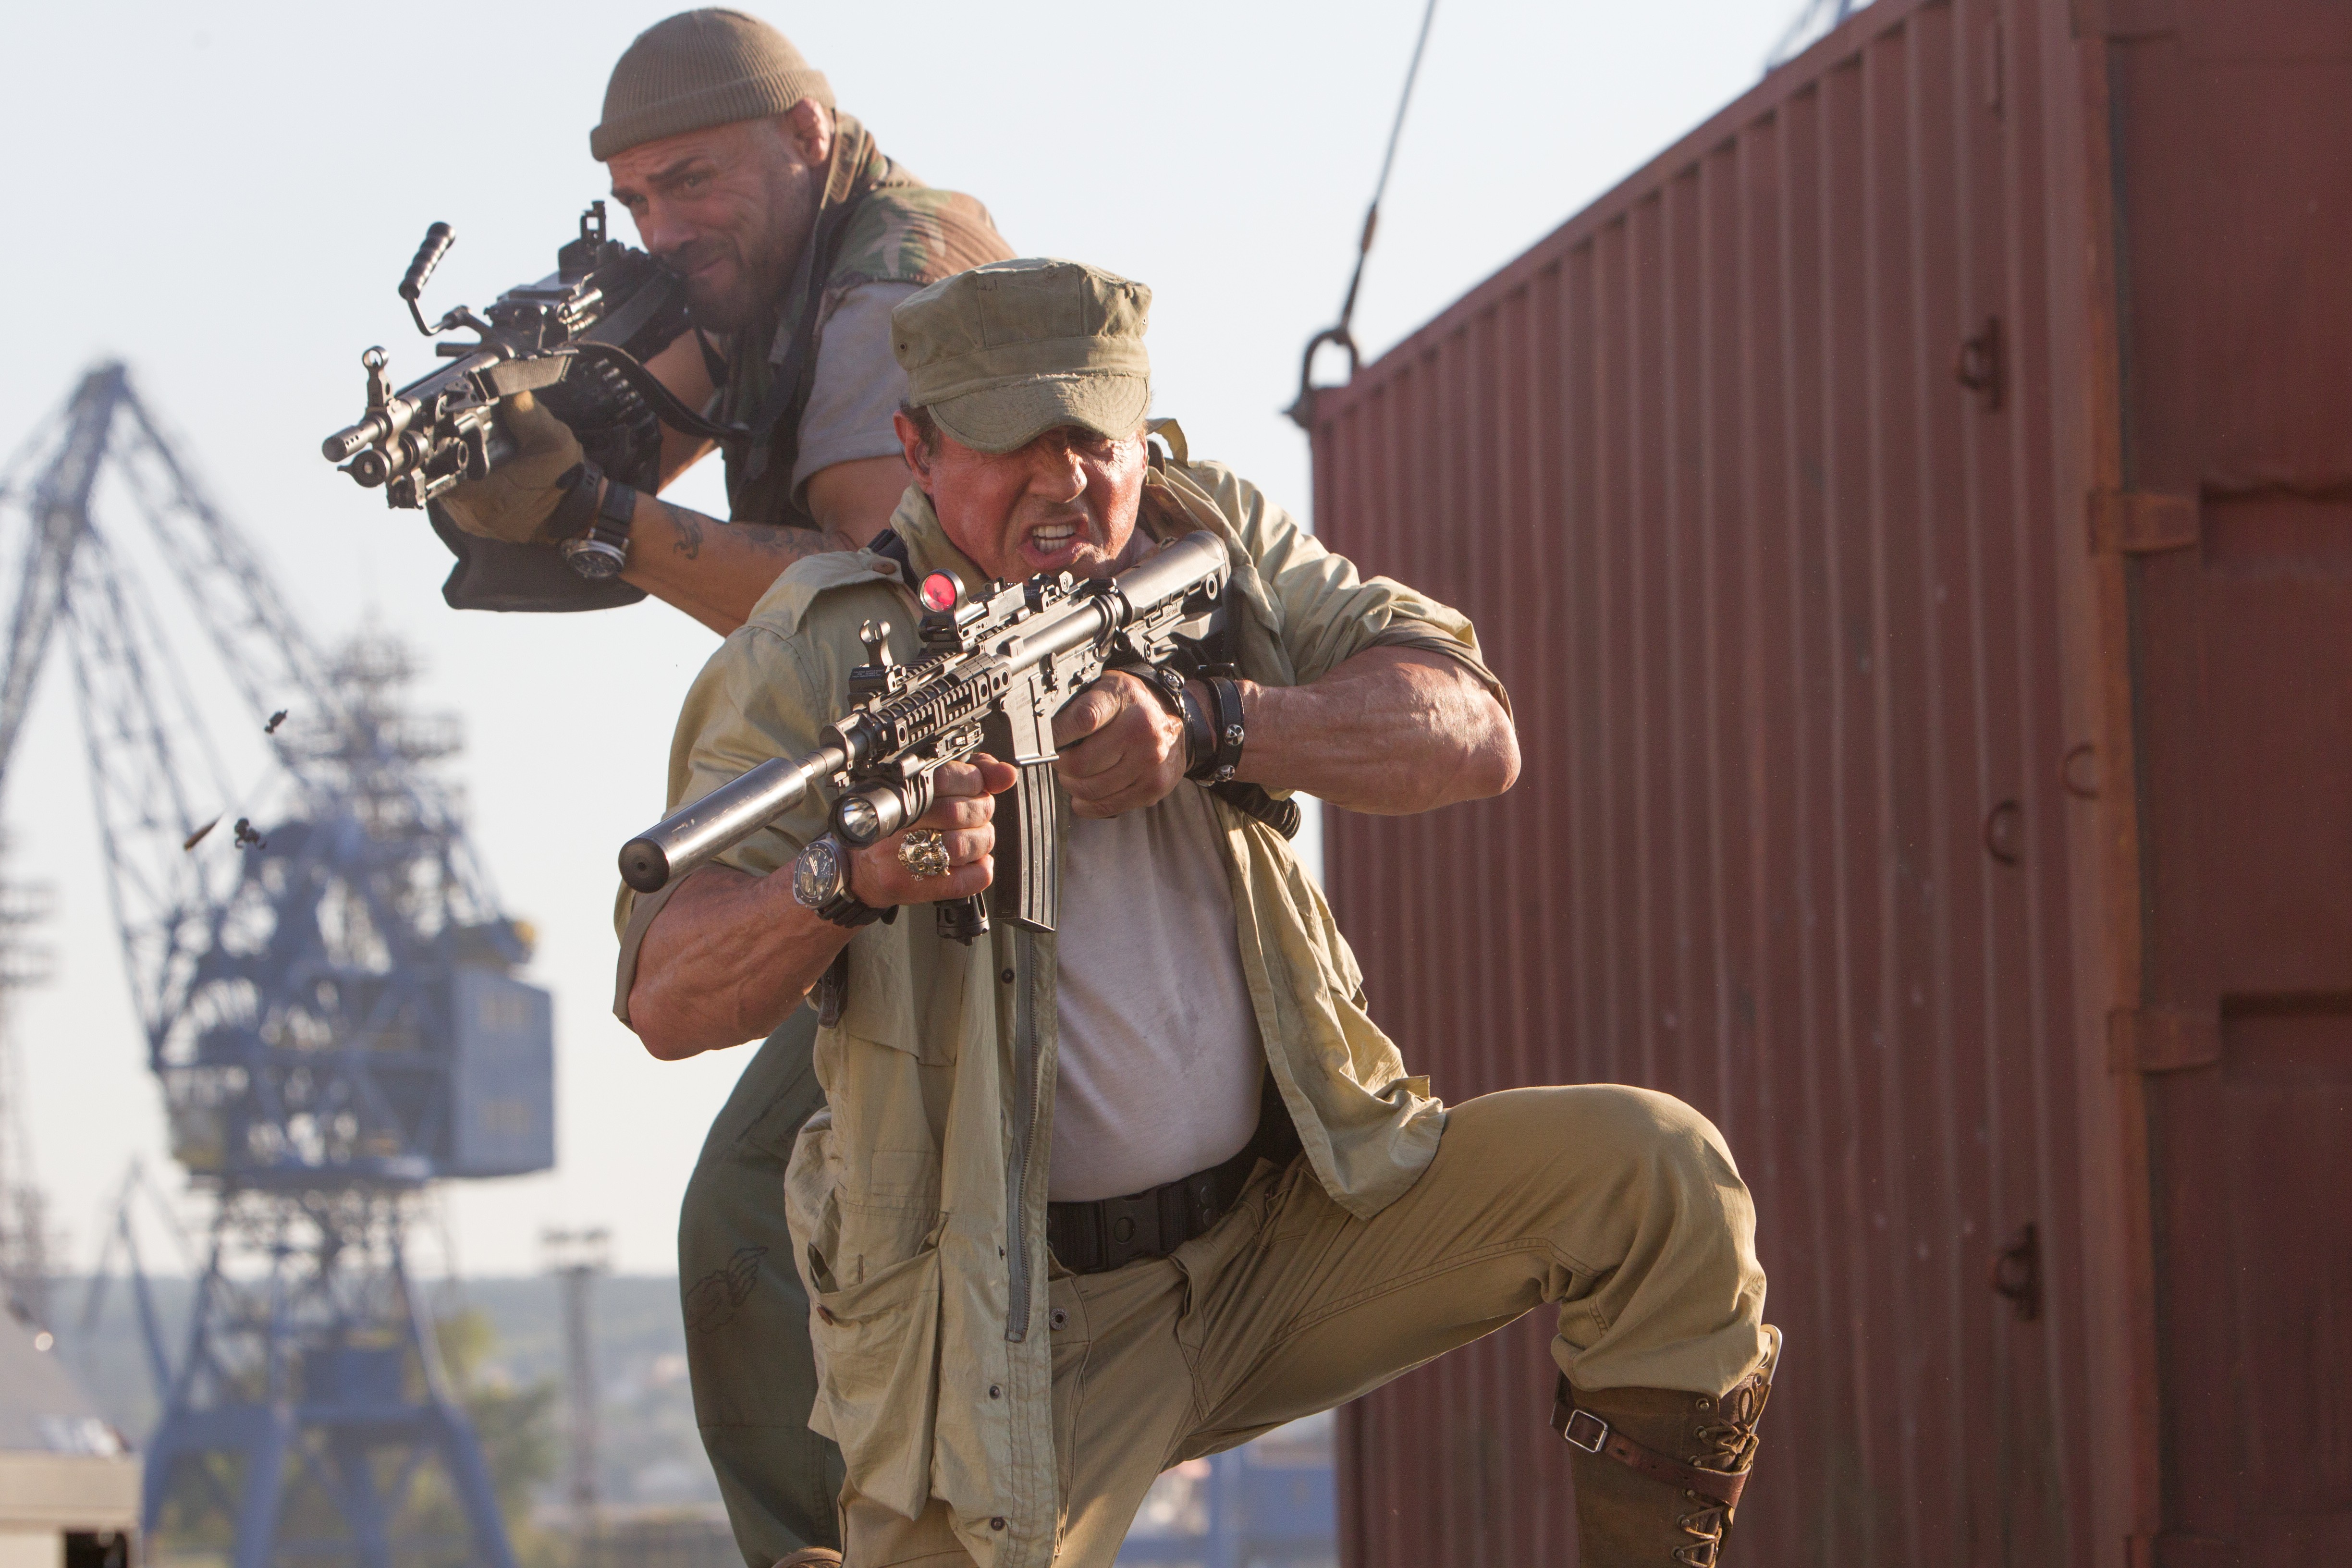 Barney Ross Randy Couture Sylvester Stallone The Expendables 3 Toll Road 4896x3264